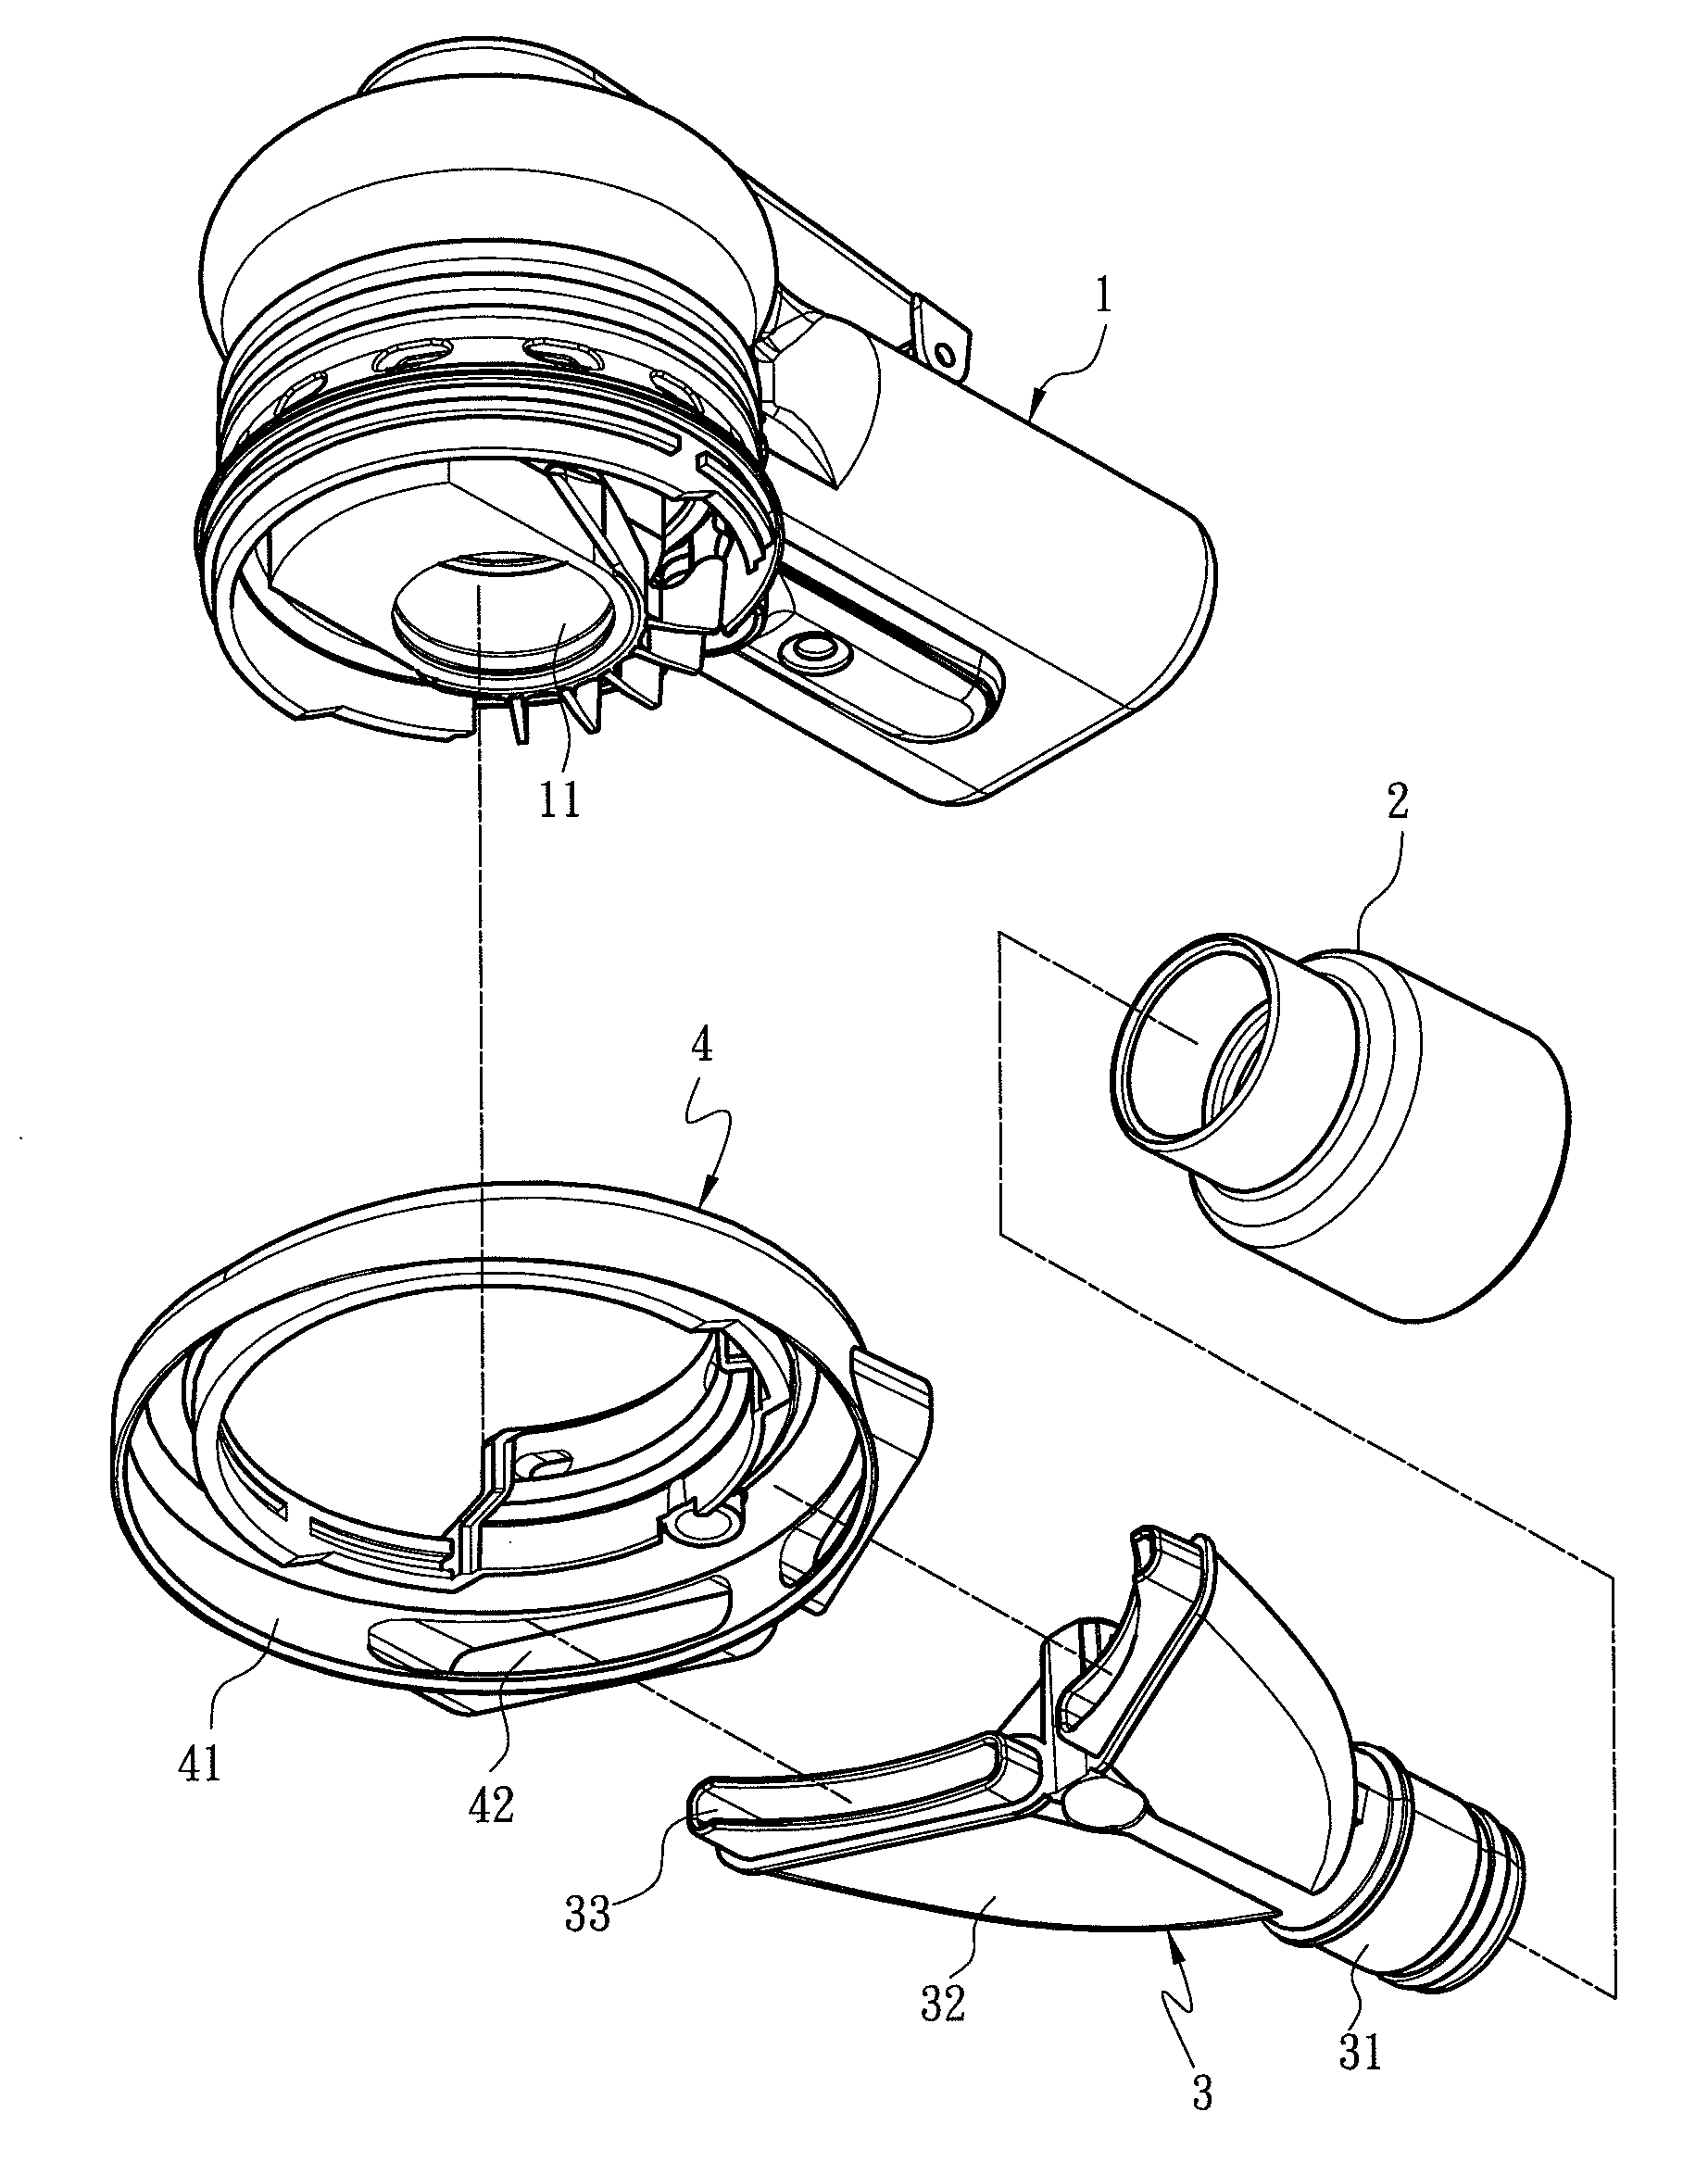 Negative pressure dust collection structure for power tools